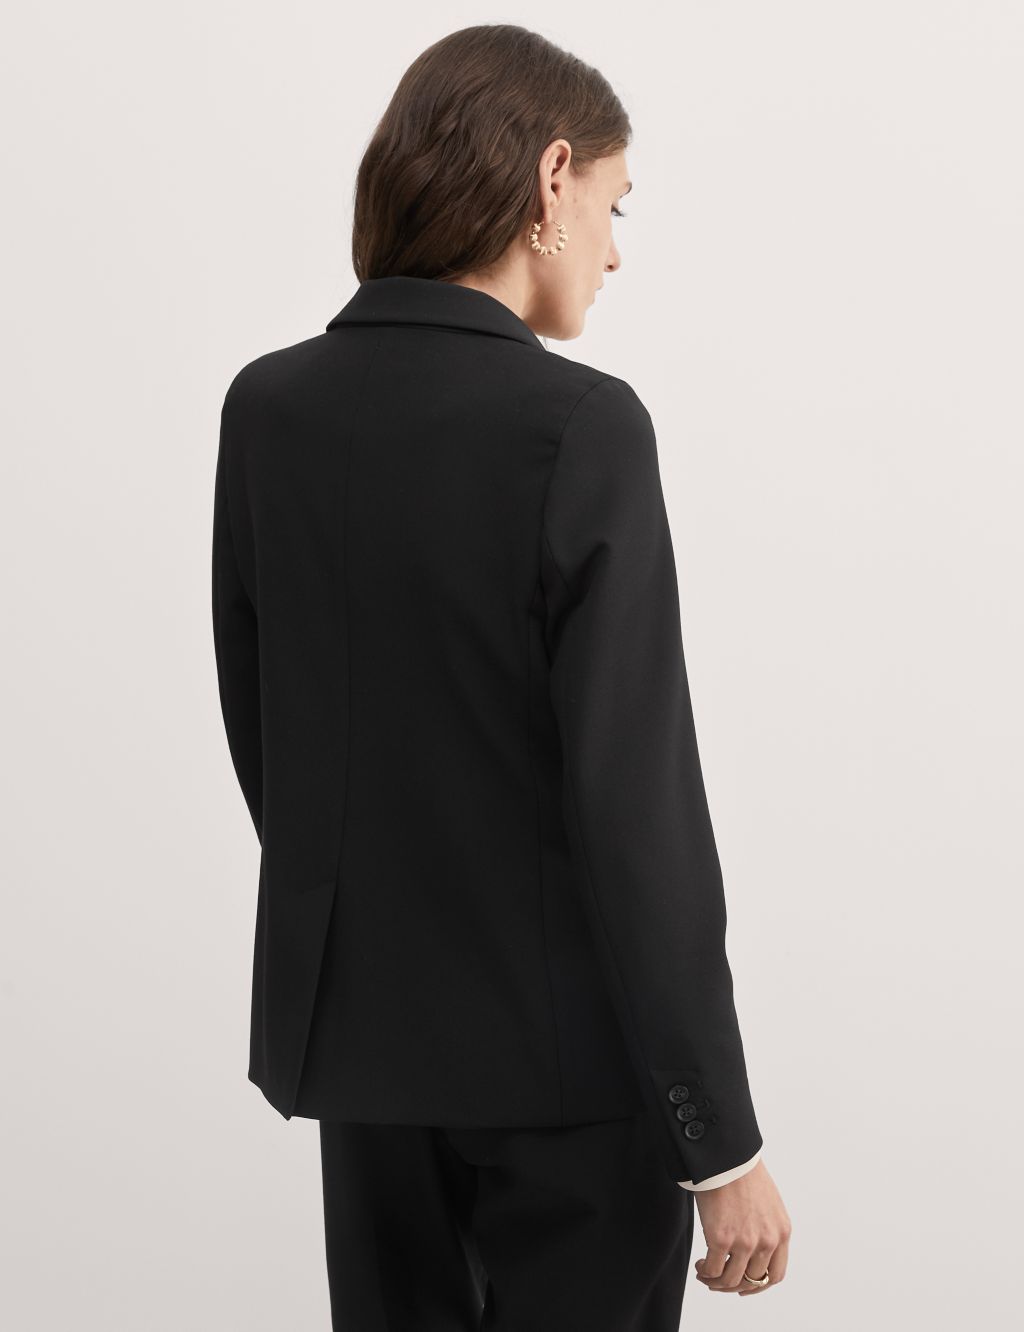 Page 6 - Women’s Coats & Jackets | M&S